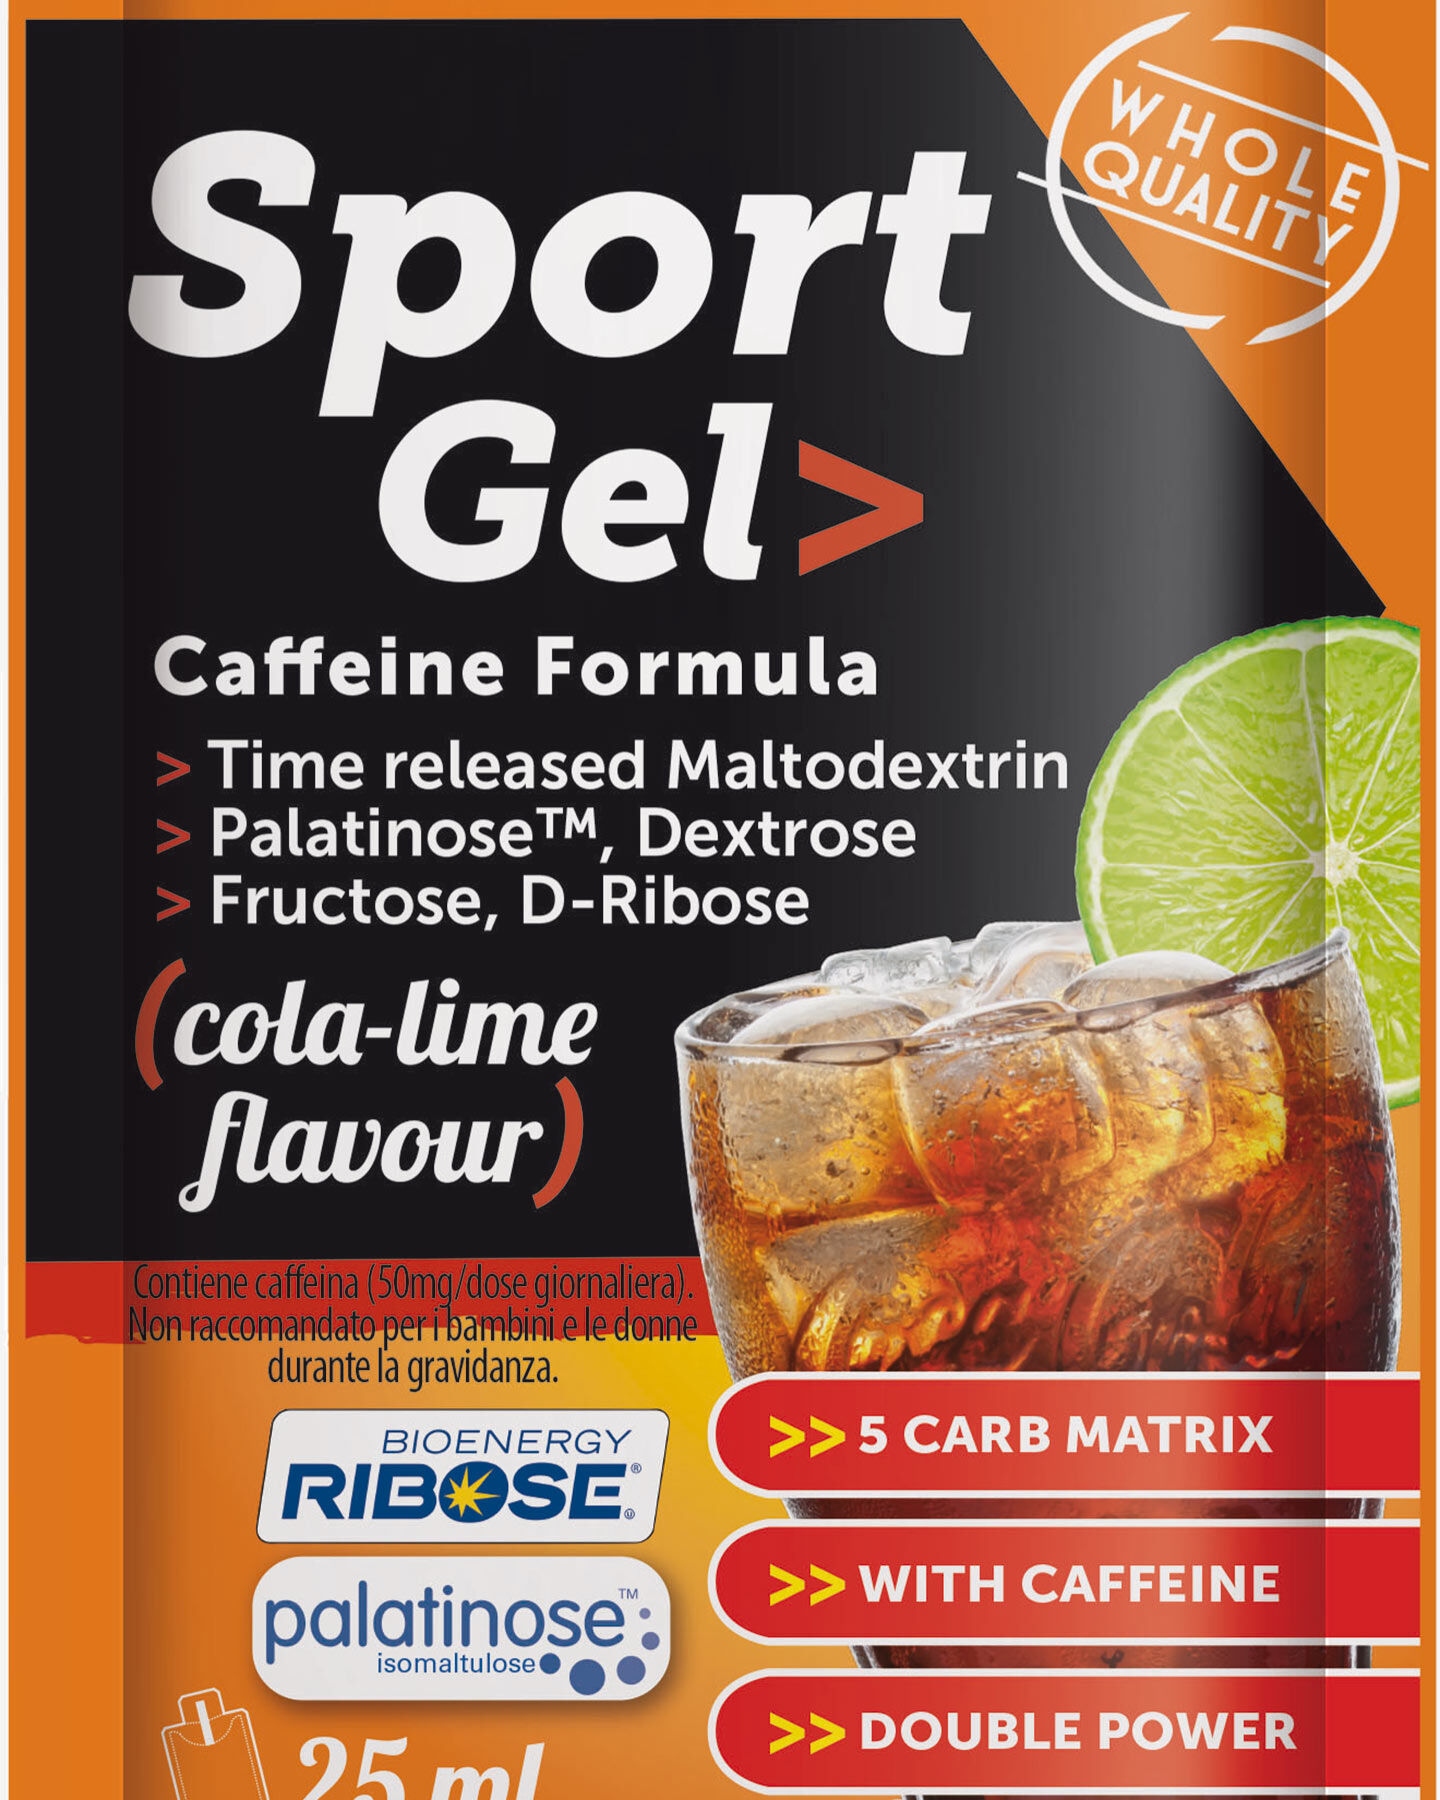  Energetico NAMED SPORT GEL S4028456|1|UNI scatto 1